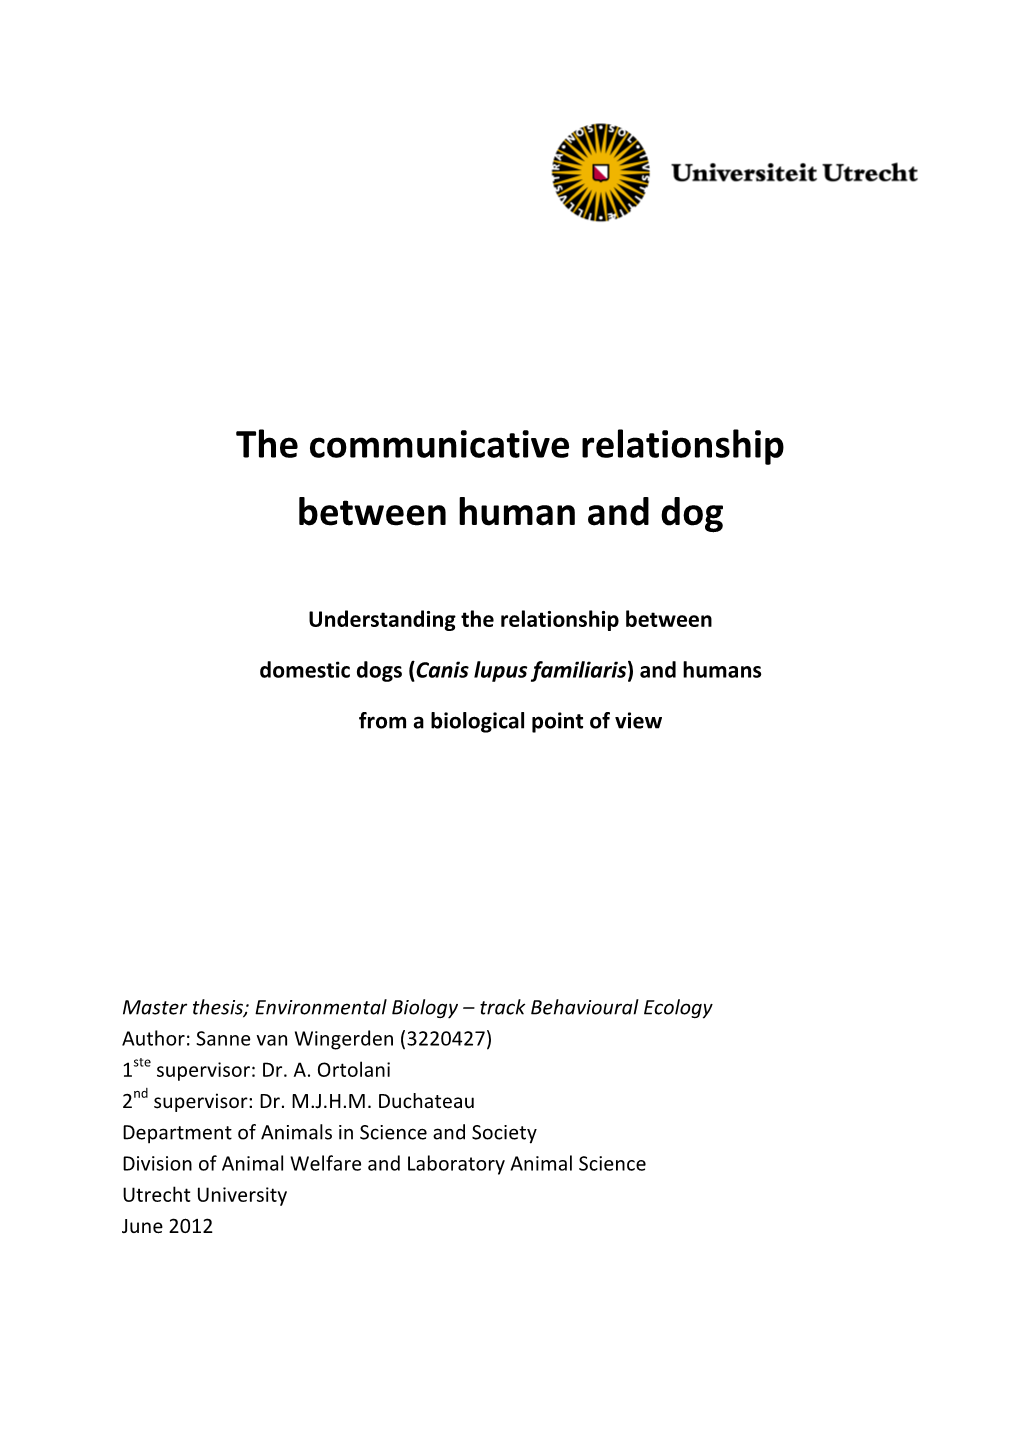 The Communicative Relationship Between Human and Dog